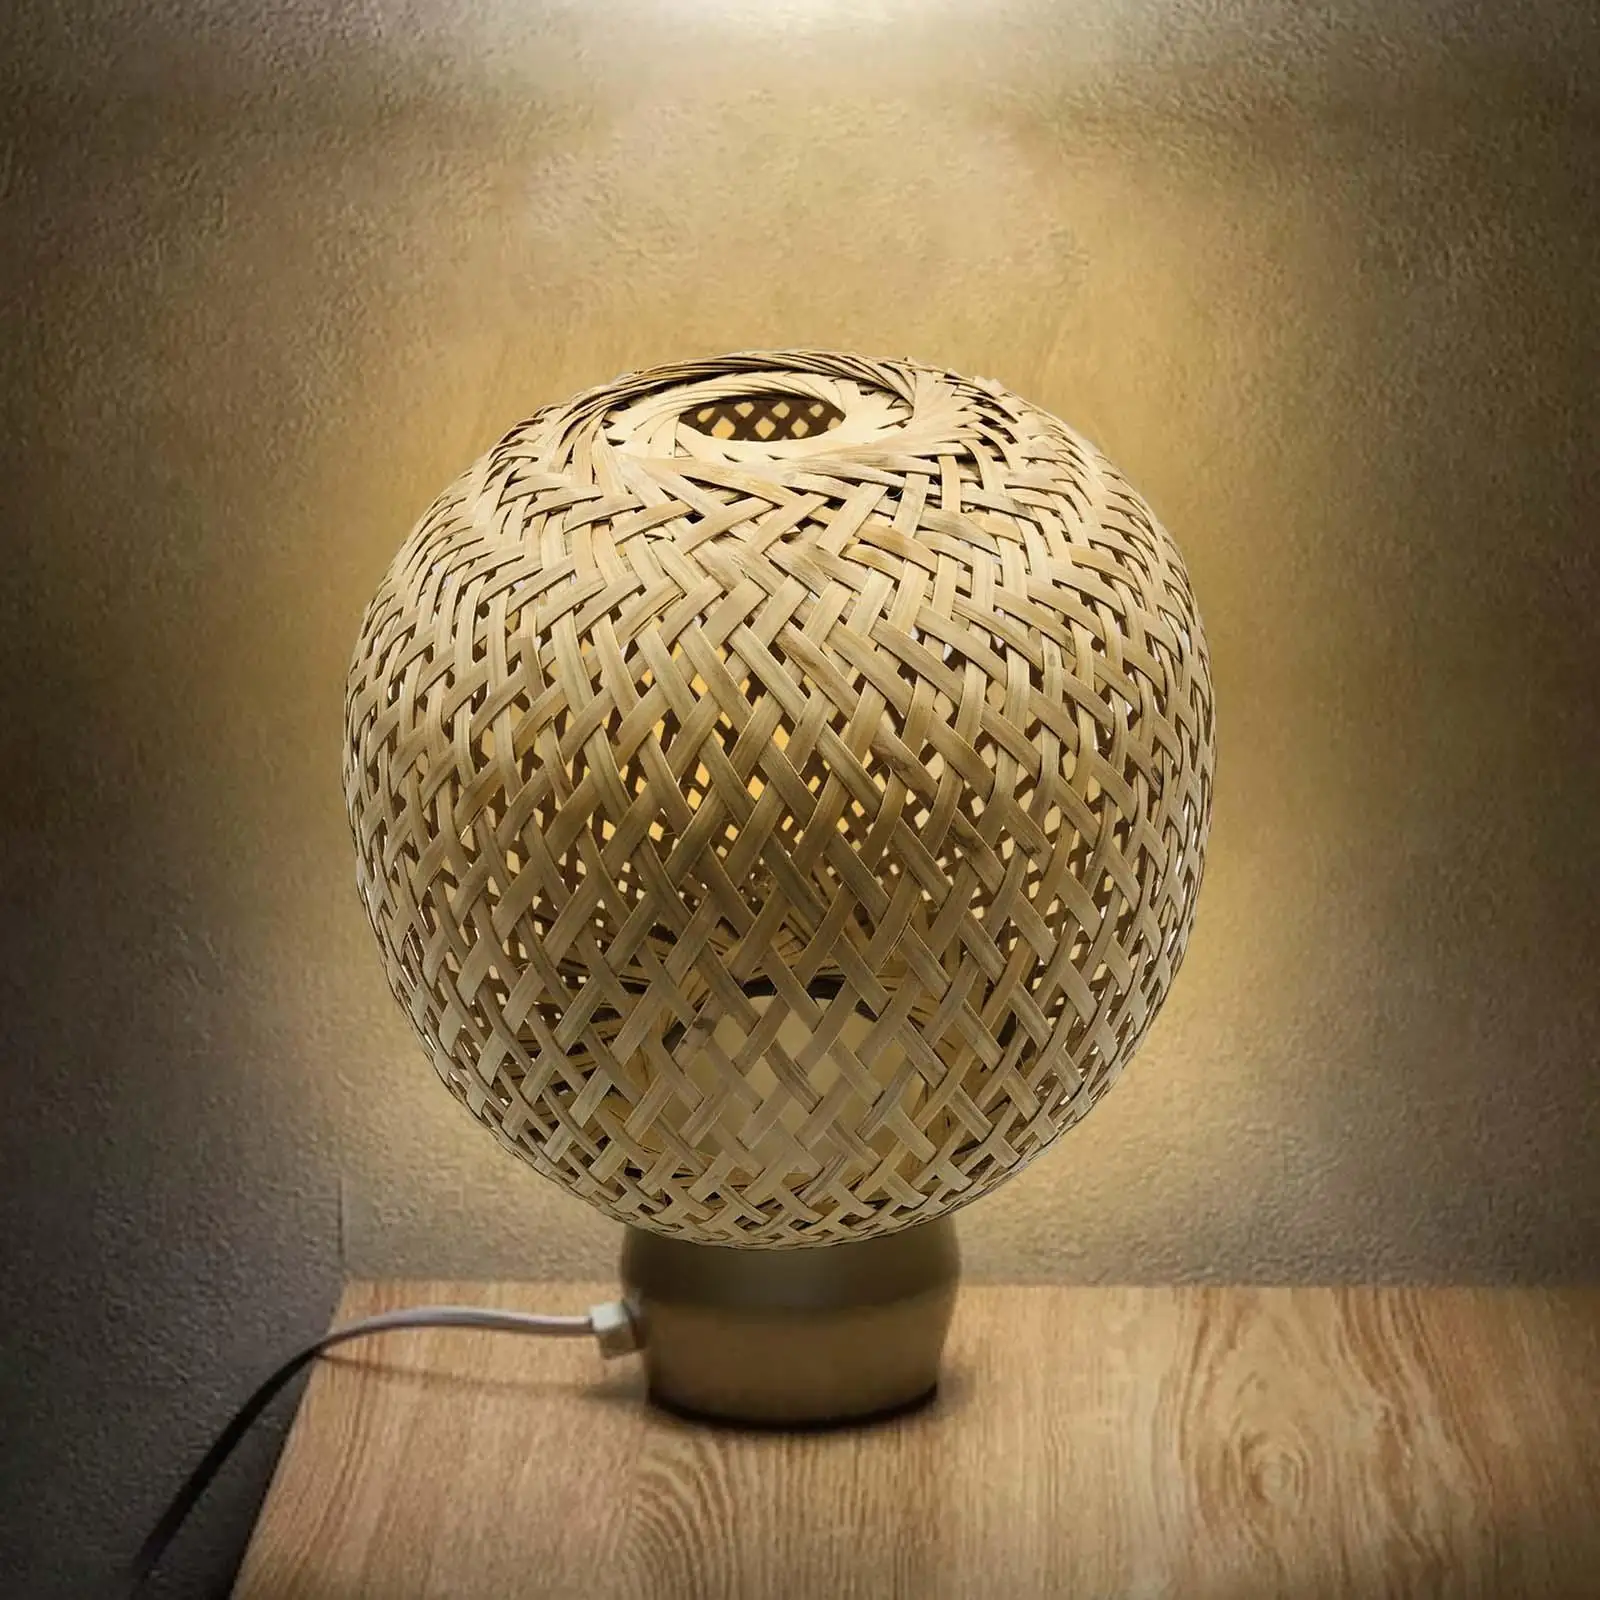 Rustic Pendant Light Cover Ceiling Light Fixture Ornament Minimalistic Woven Bamboo Lamp Shade for Nursery Living Room Bedroom